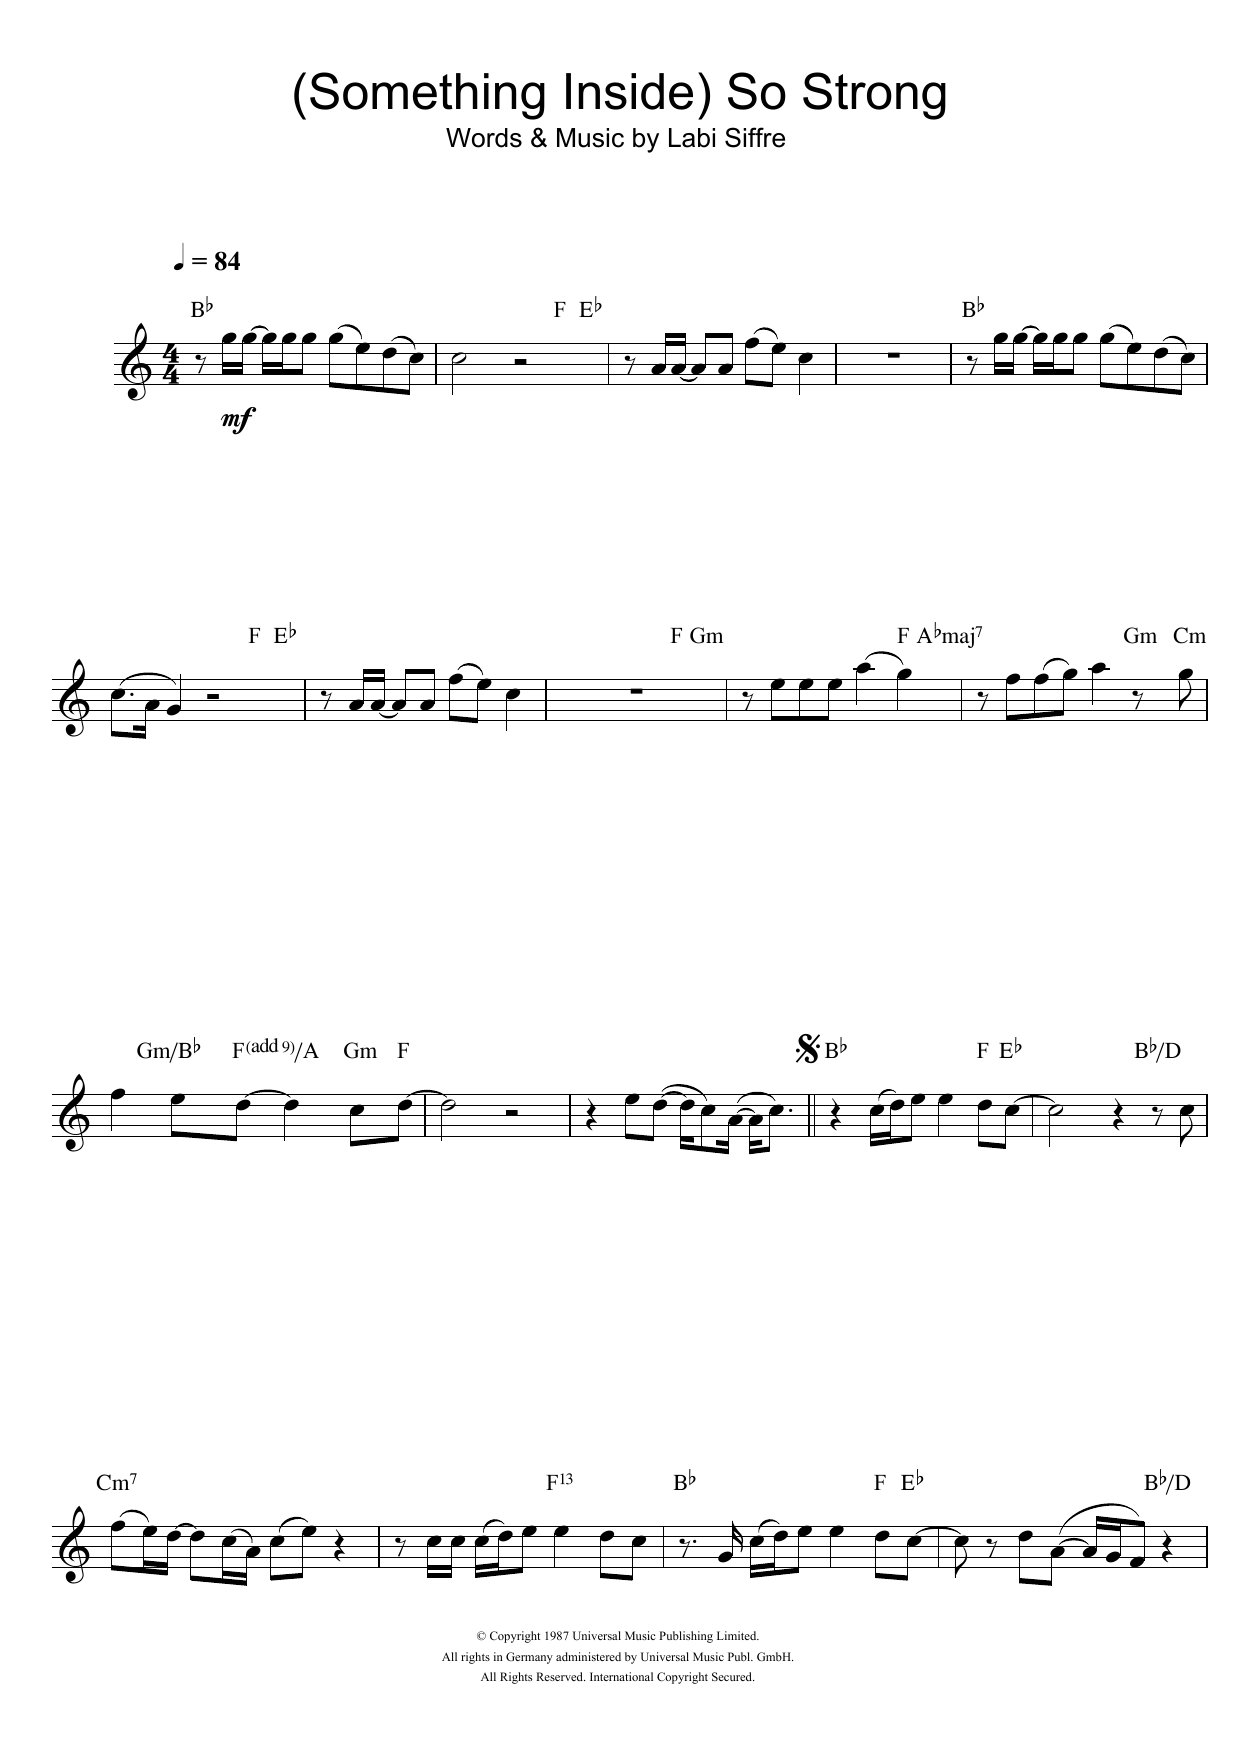 Download Labi Siffre (Something Inside) So Strong Sheet Music